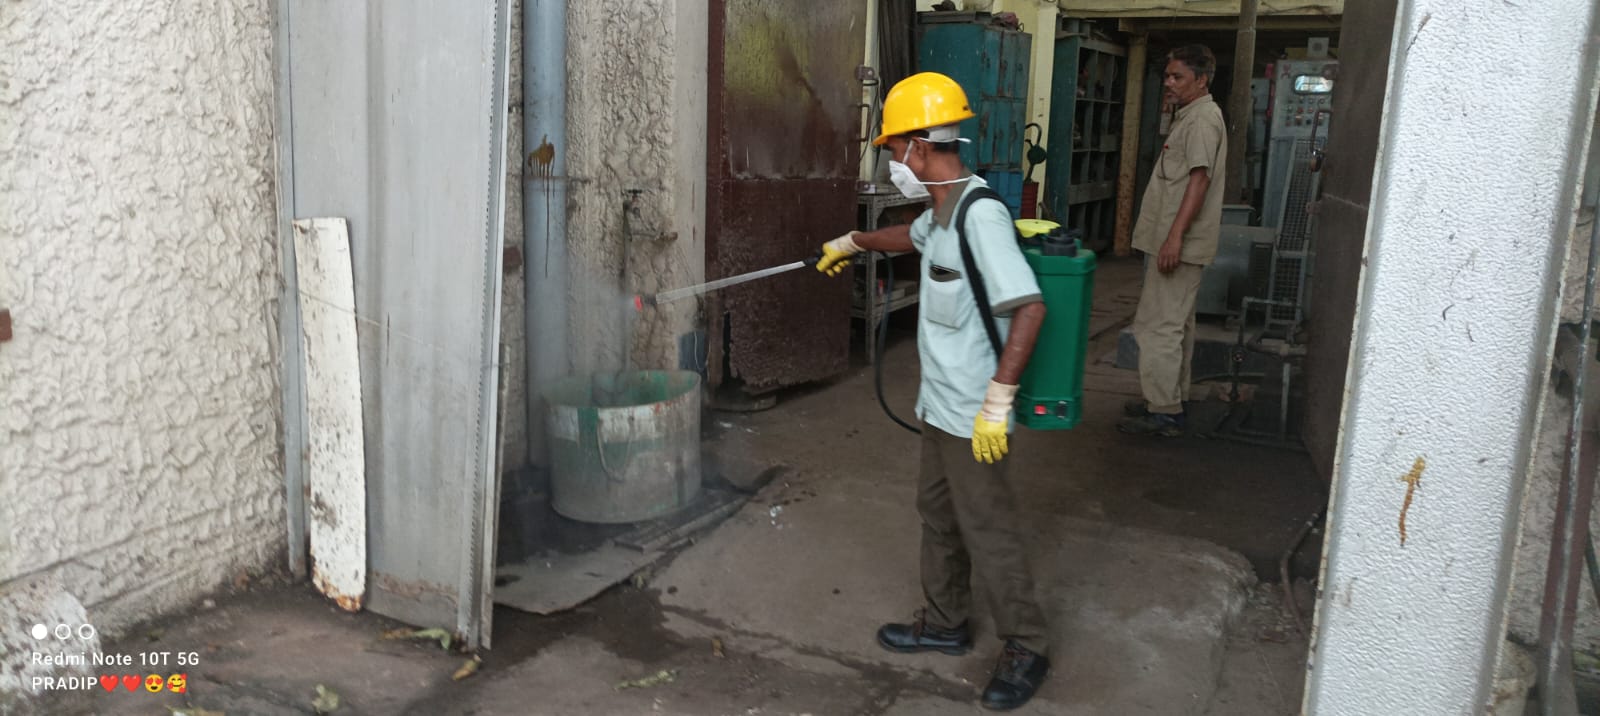 Insecticidal Fumigation Drive to tackle Mosquito Breeding & Pest Control at work place